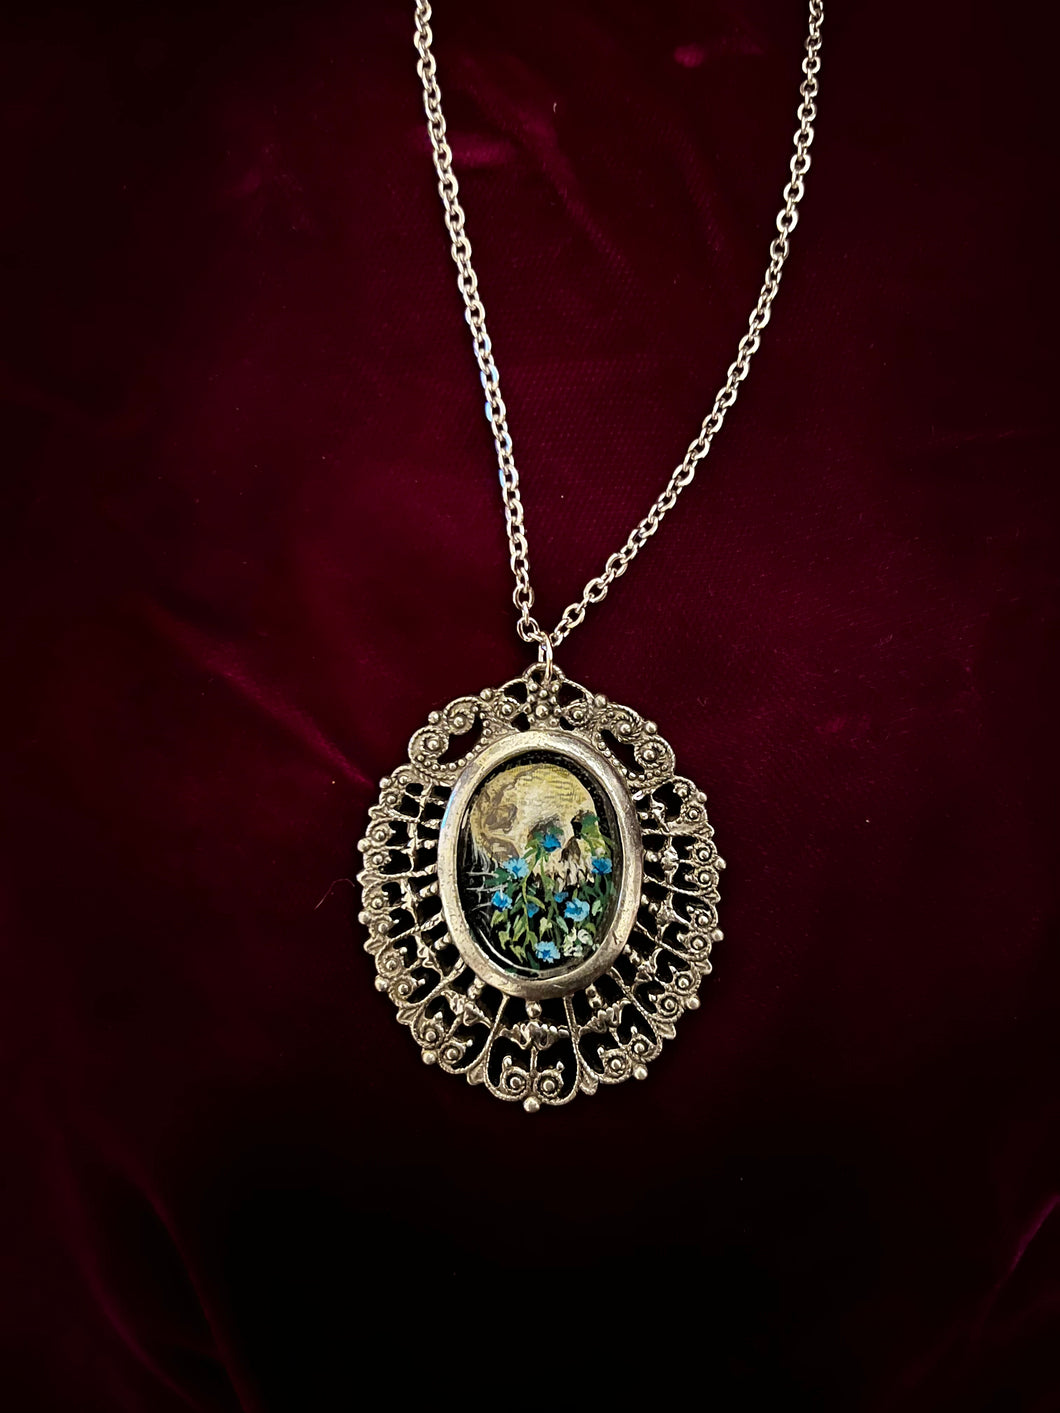 Skull and Blue Flowers in Victorian Pendant